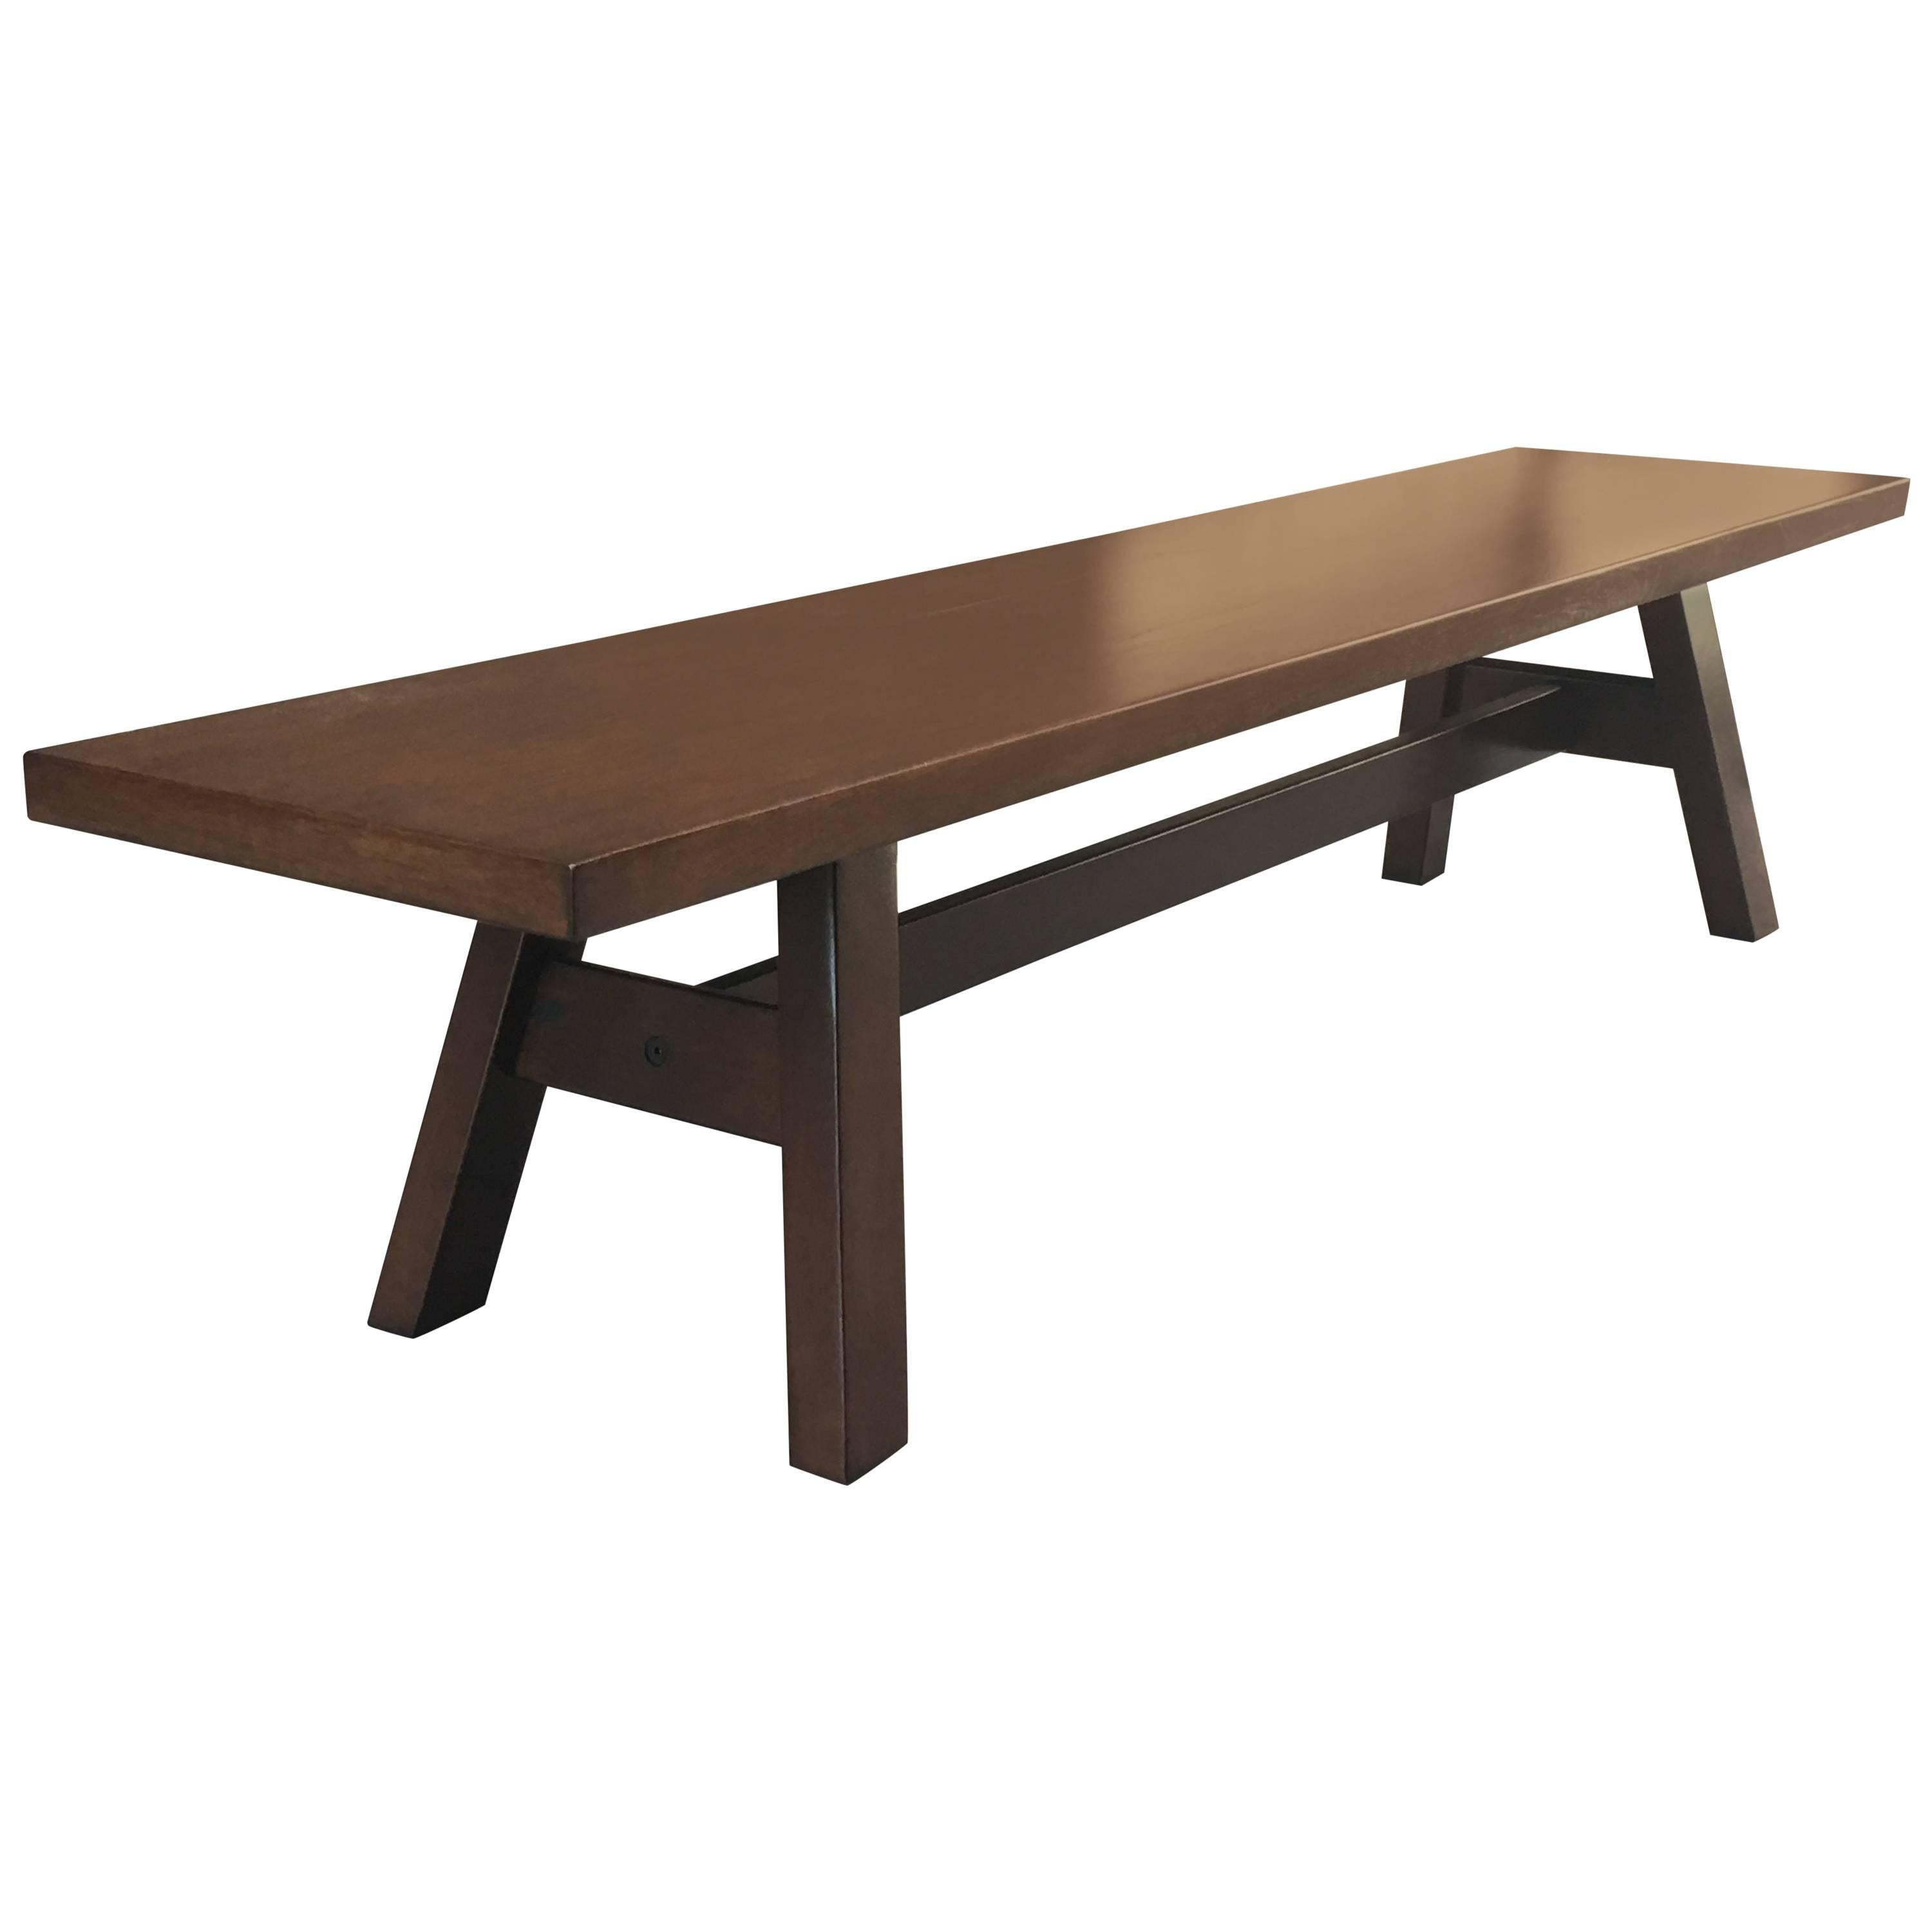 “Torbecchia" Cocktail Table / Bench by Giovanni Michelucci For Sale